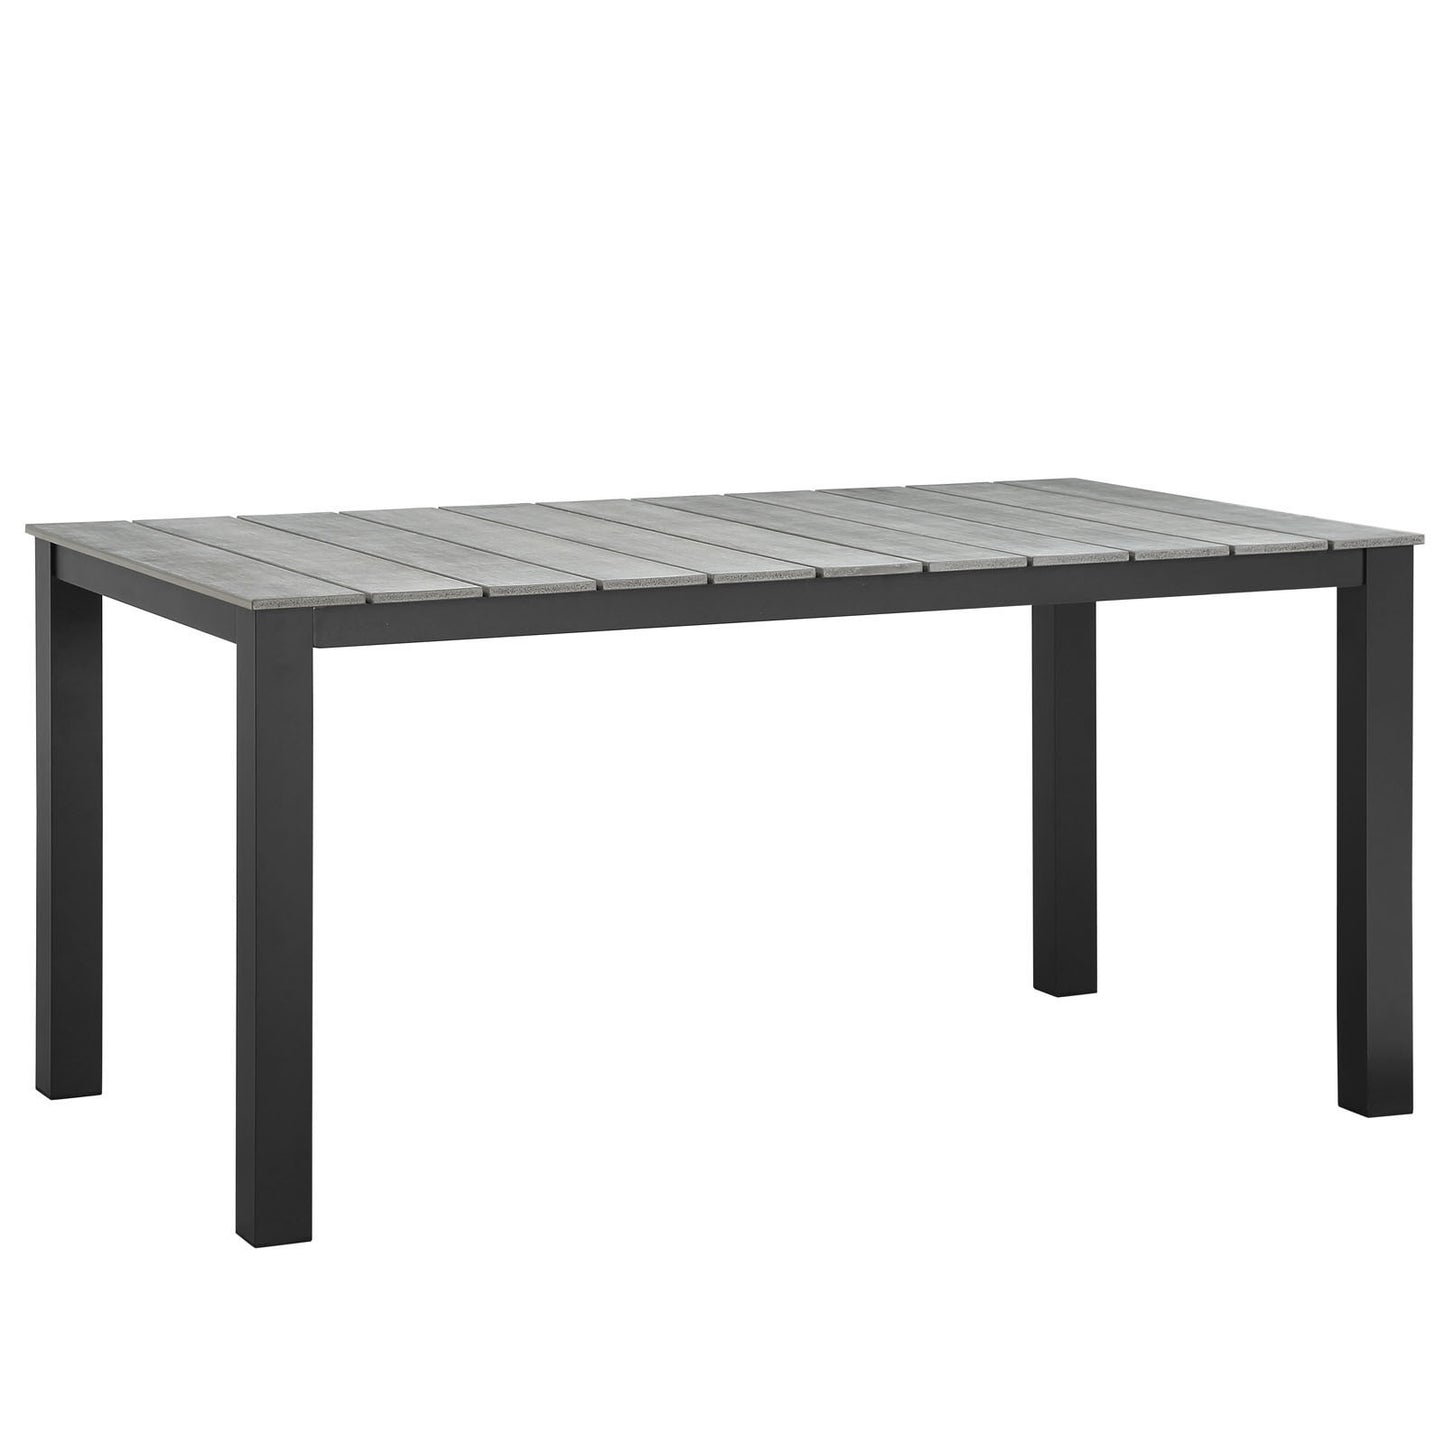 Morocco 63" Outdoor Patio Dining Table - living-essentials